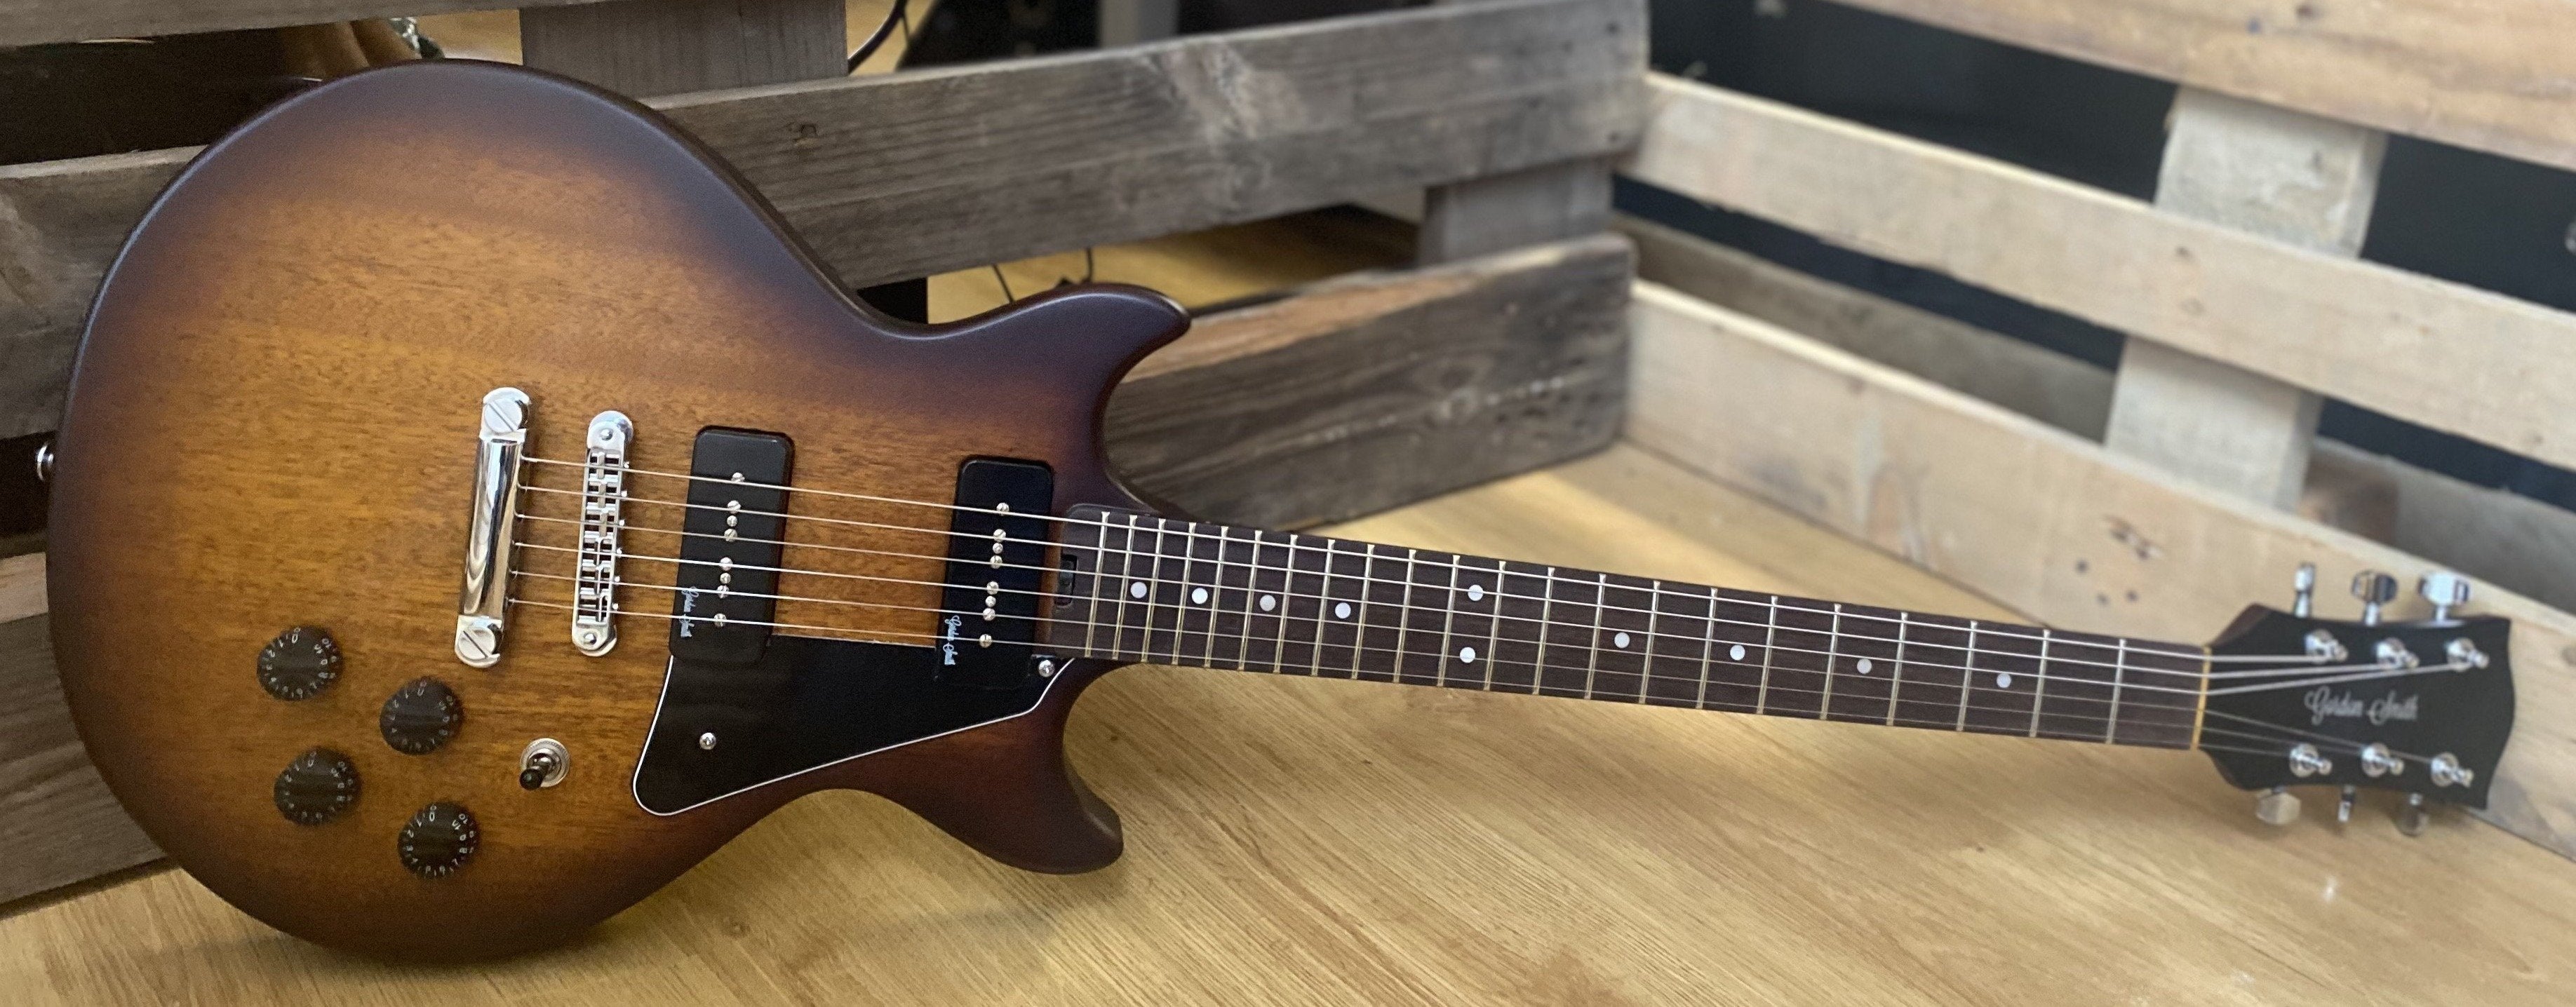 Gordon Smith GS2 P90 Thick Body Mahogany S/N 21112, Electric Guitar for sale at Richards Guitars.